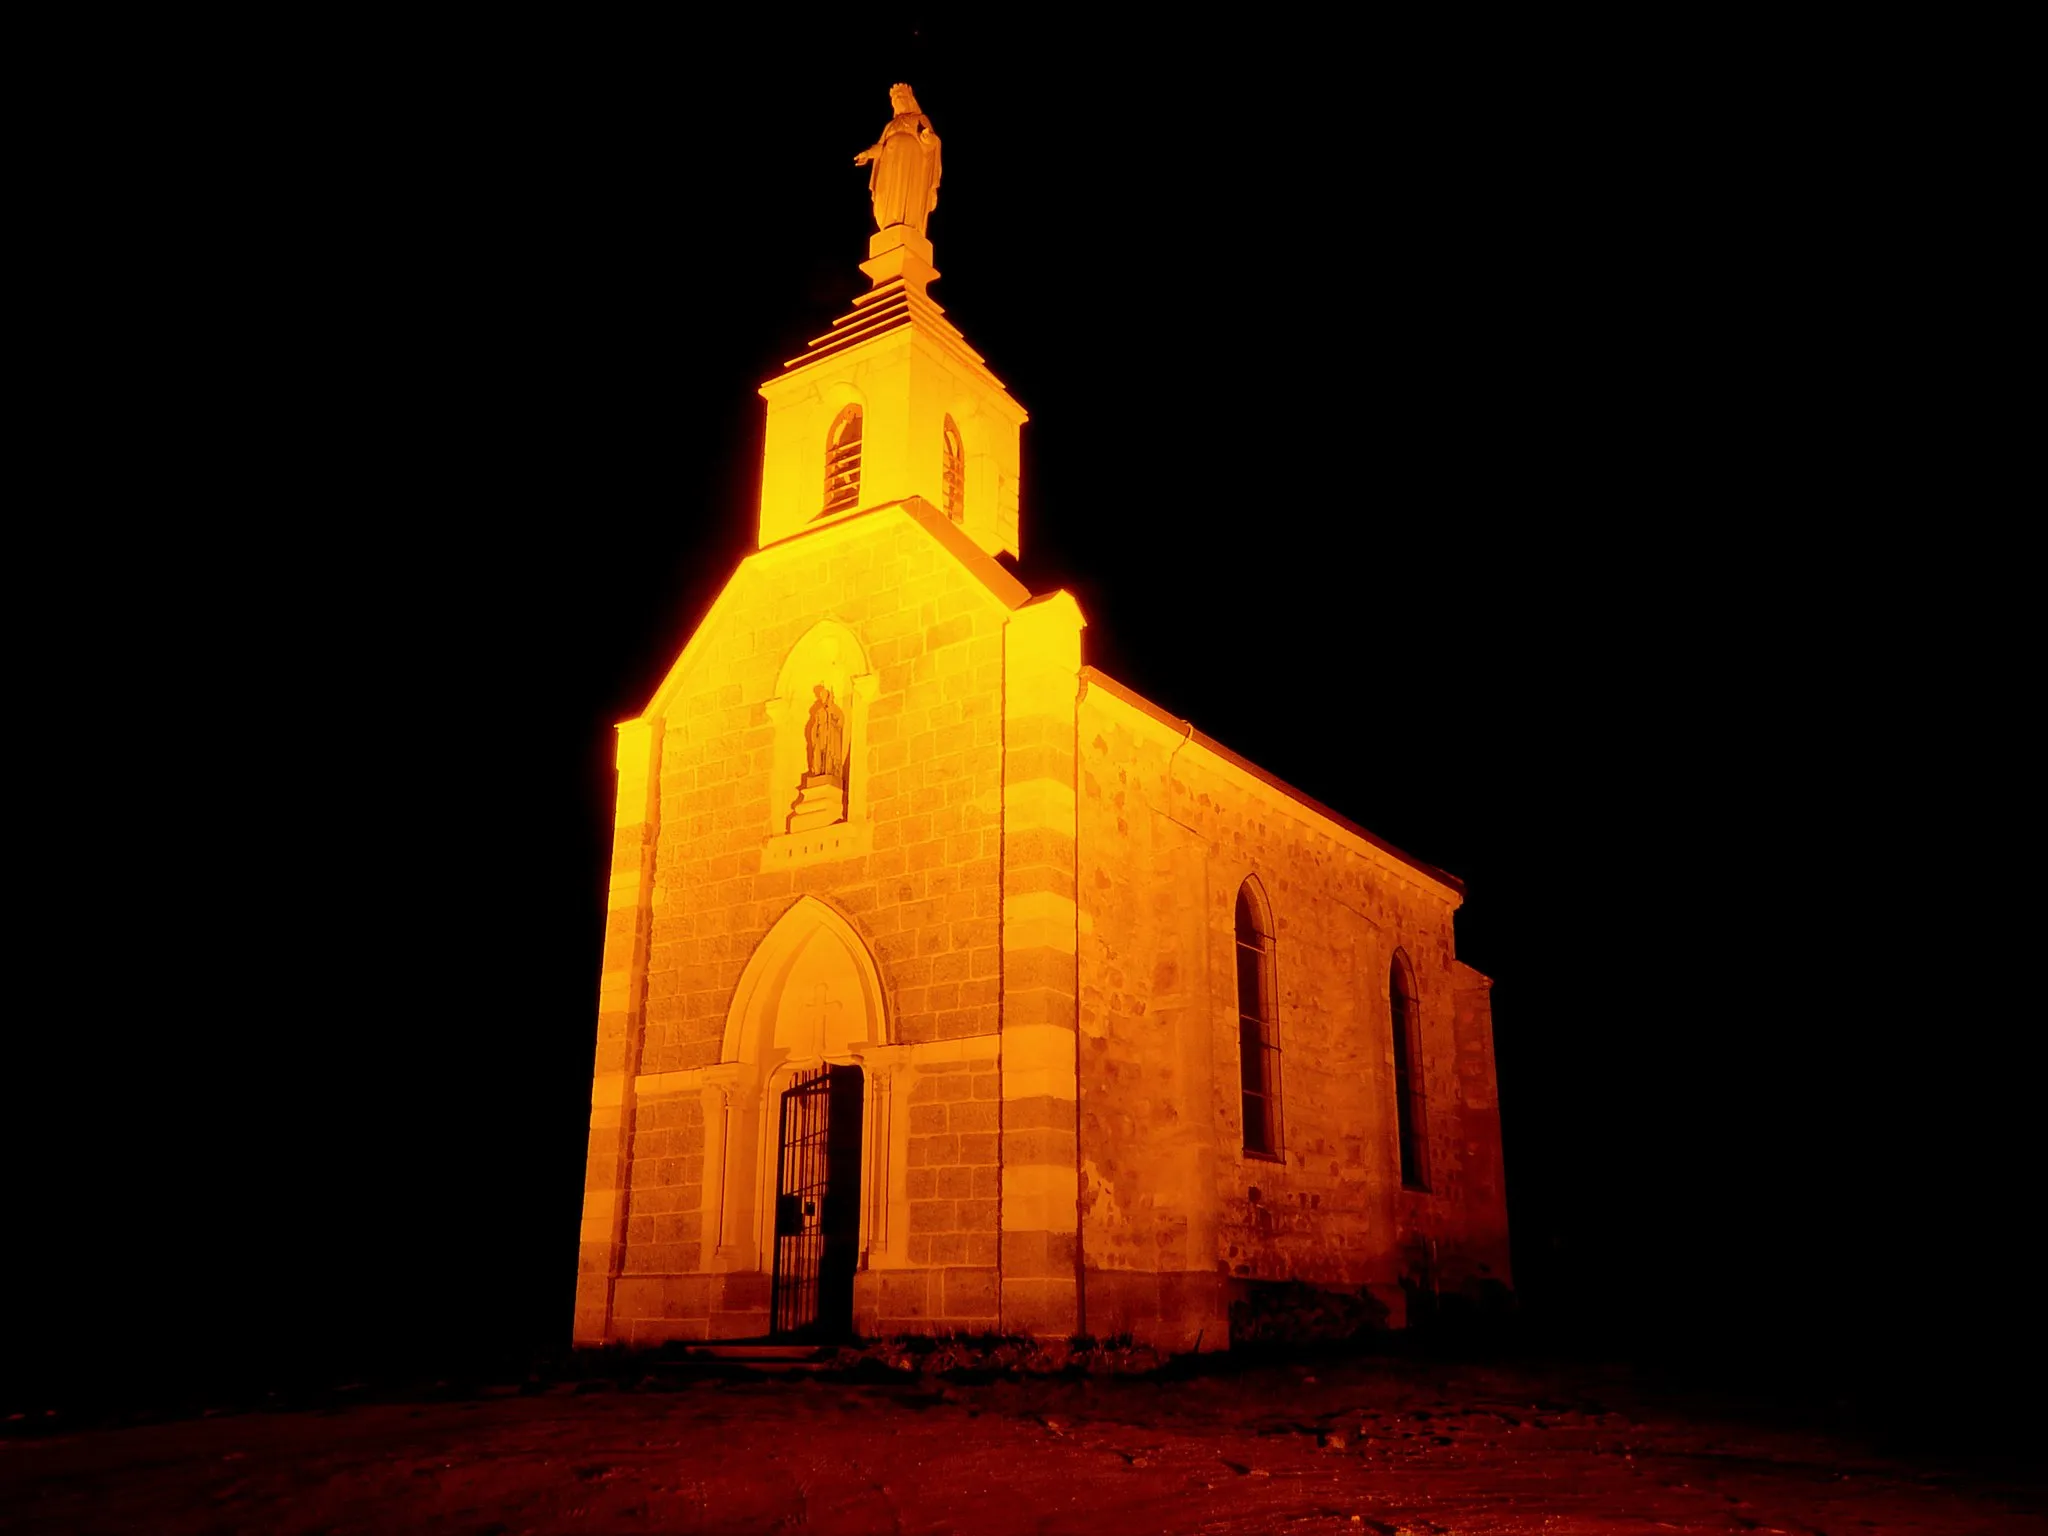 Photo showing: The "Chapelle de la Madone", dominating the small city of Fleurie, France, taken by night.